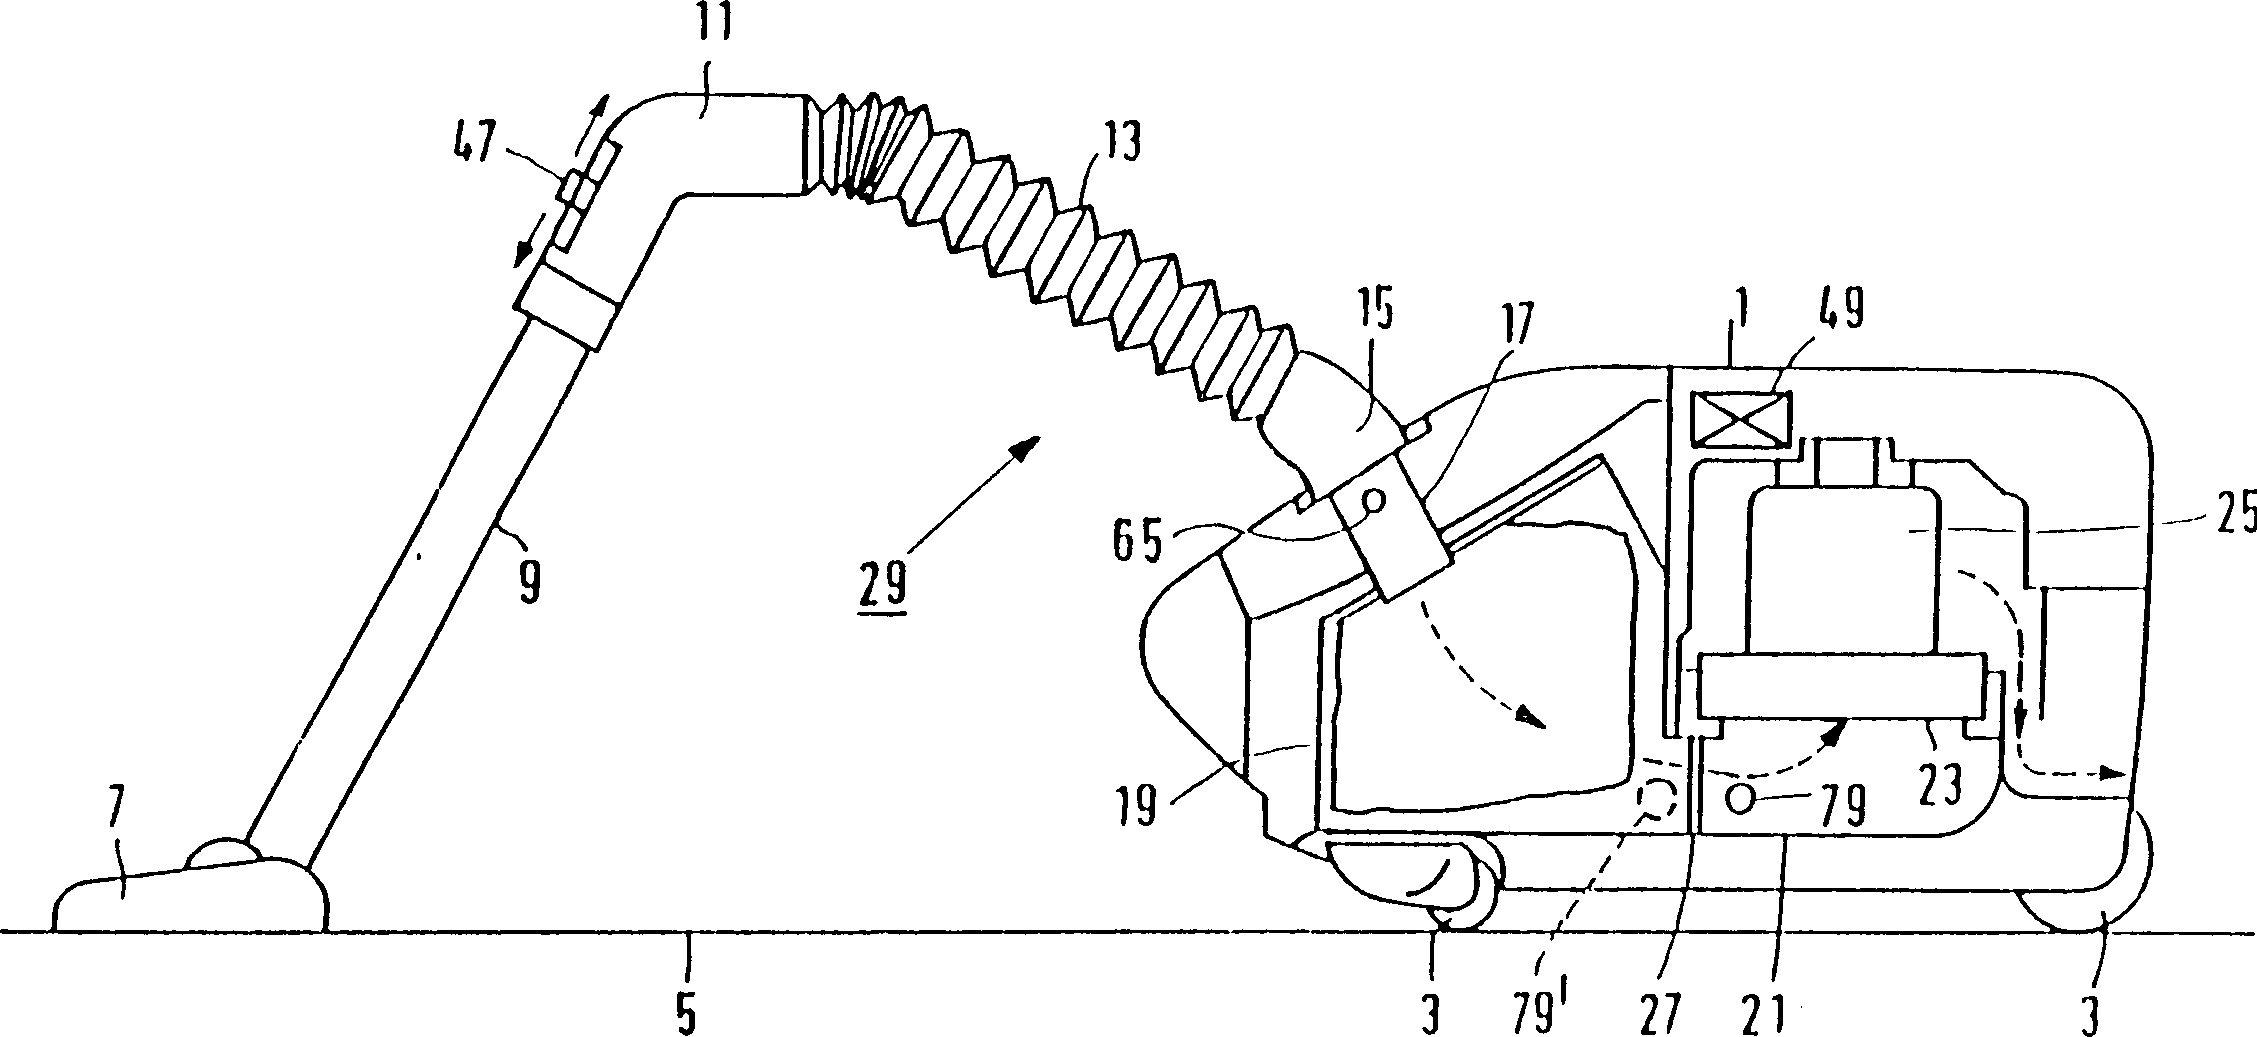 Vacuum cleaner with power control in dependence on mode of operation of electrical brush